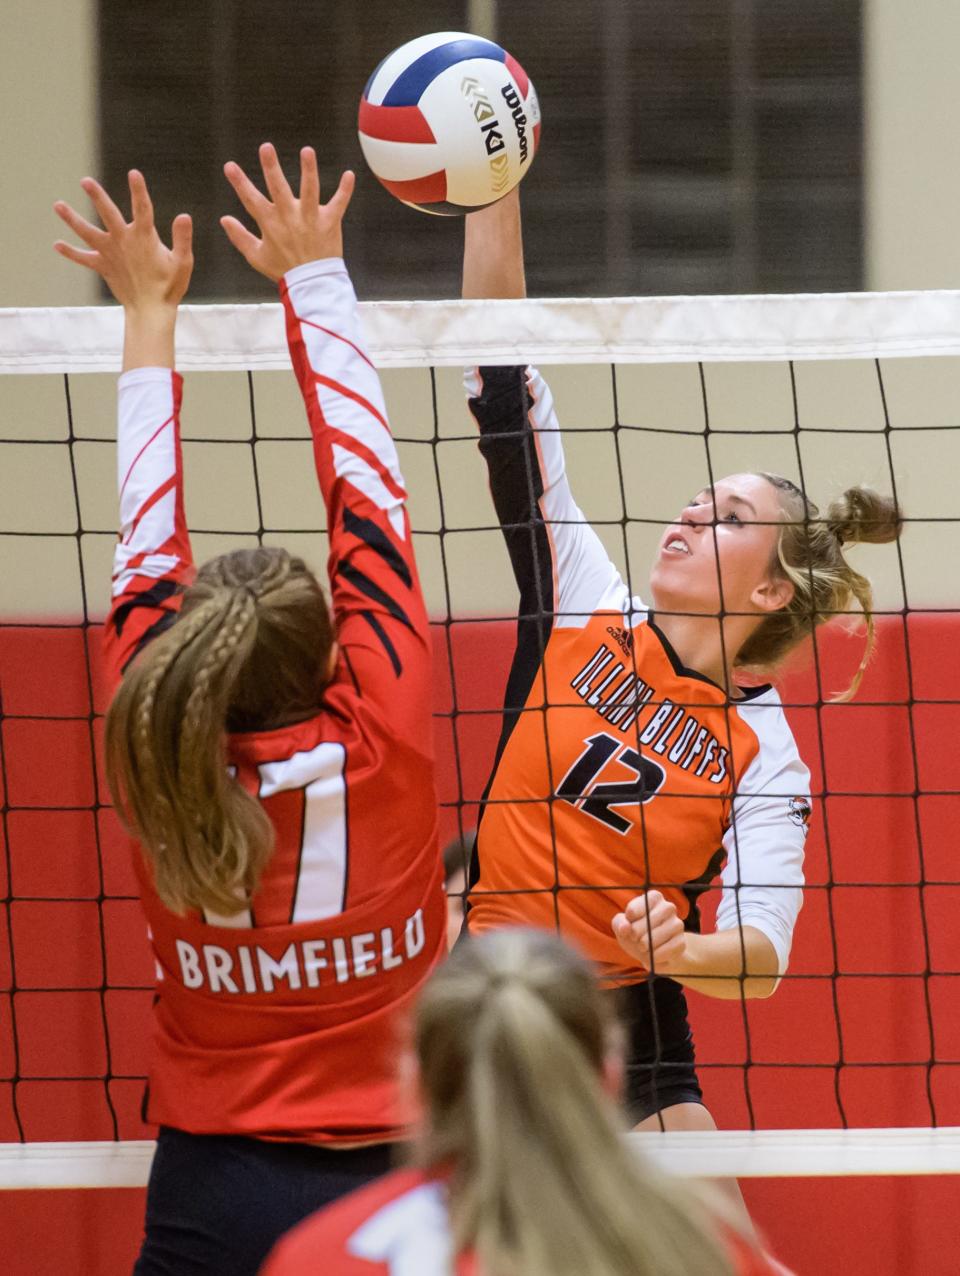 Illini Bluffs' Annabelle Fortin (12) spikes the ball against Brimfield's Josie Wiewel in the second set of their volleyball match Thursday, Sept. 21, 2023 at Brimfield High School. Illini Bluffs defeated Brimfield in three sets 17-25, 25-19 and 25-18.